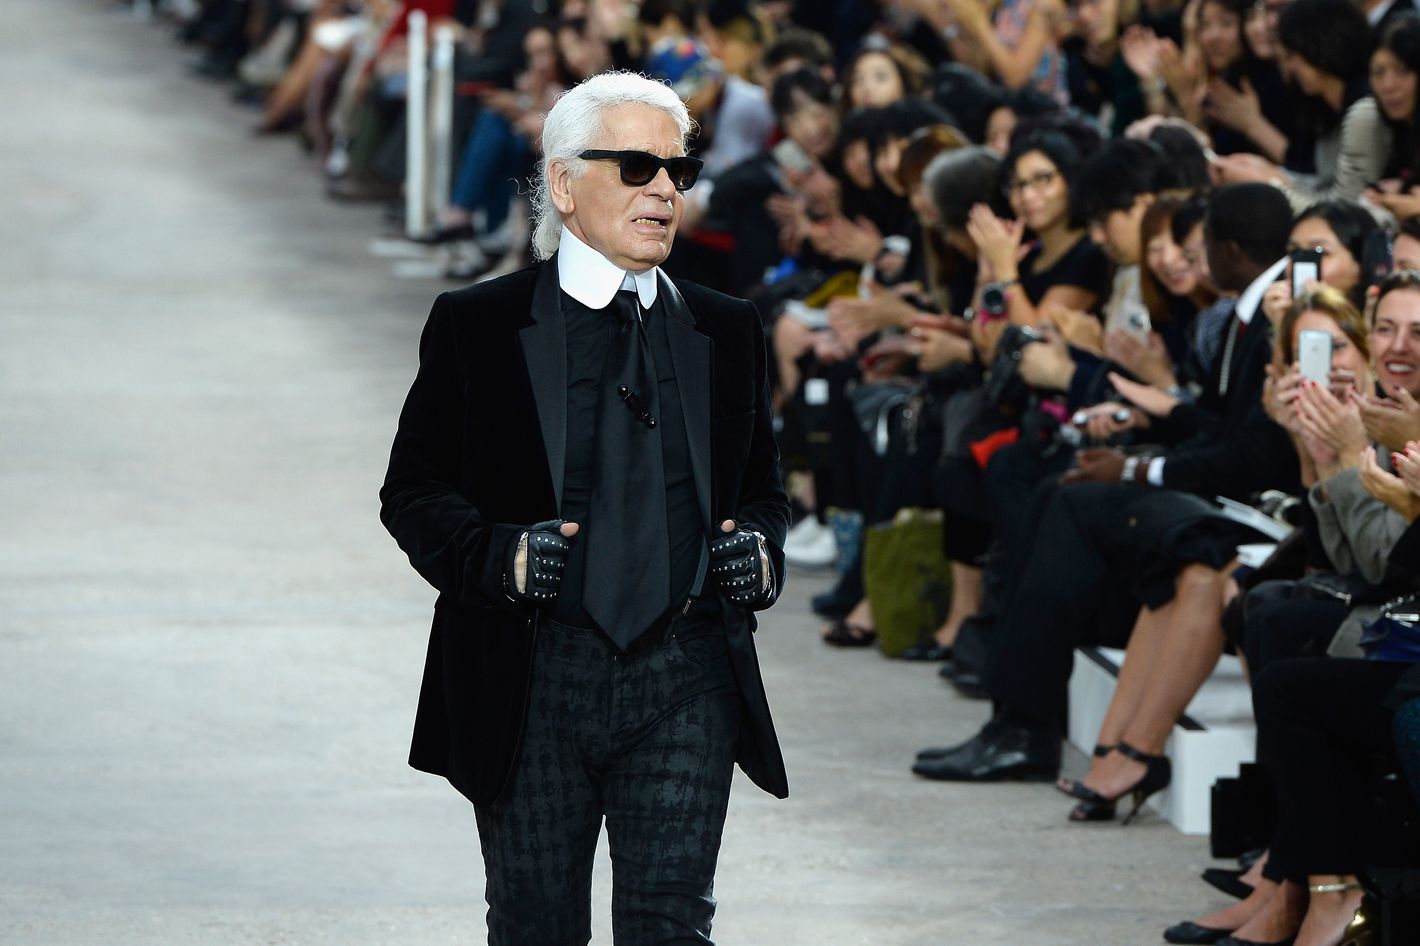 Karl Lagerfeld lost 92 pounds using a diet he called a “sort of punishment”  - Vox